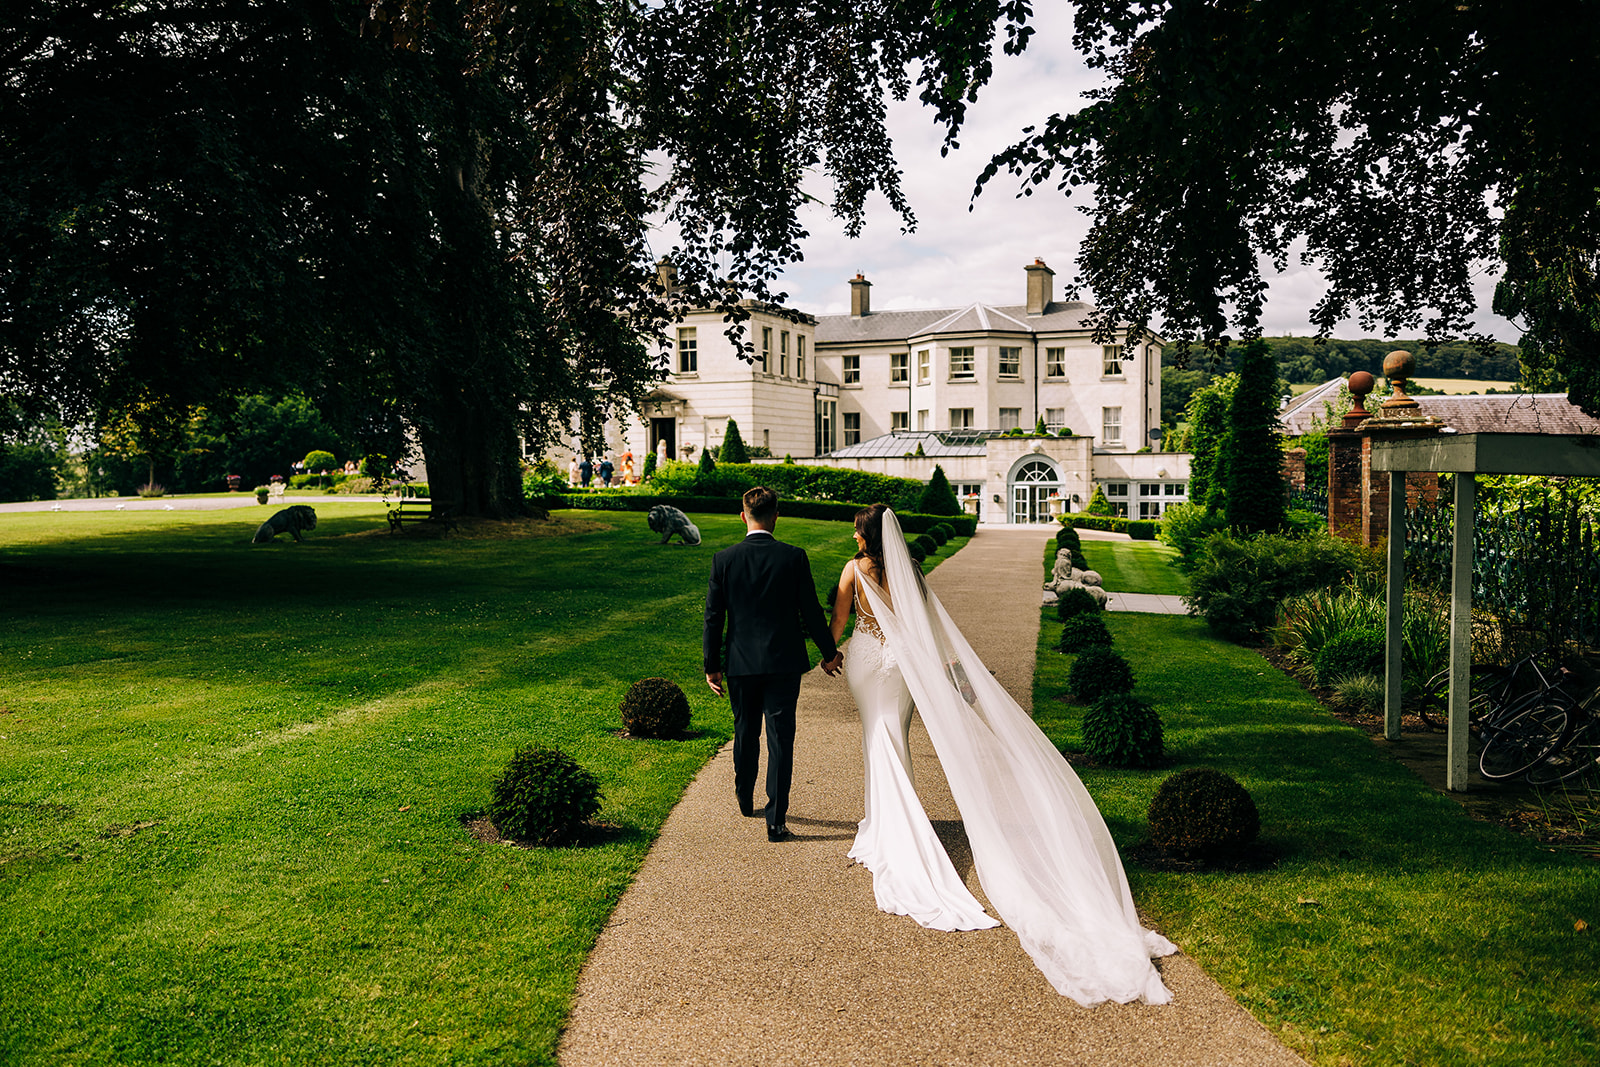 Esther and Gavin walk towards Tankardstown house to join the wedding party